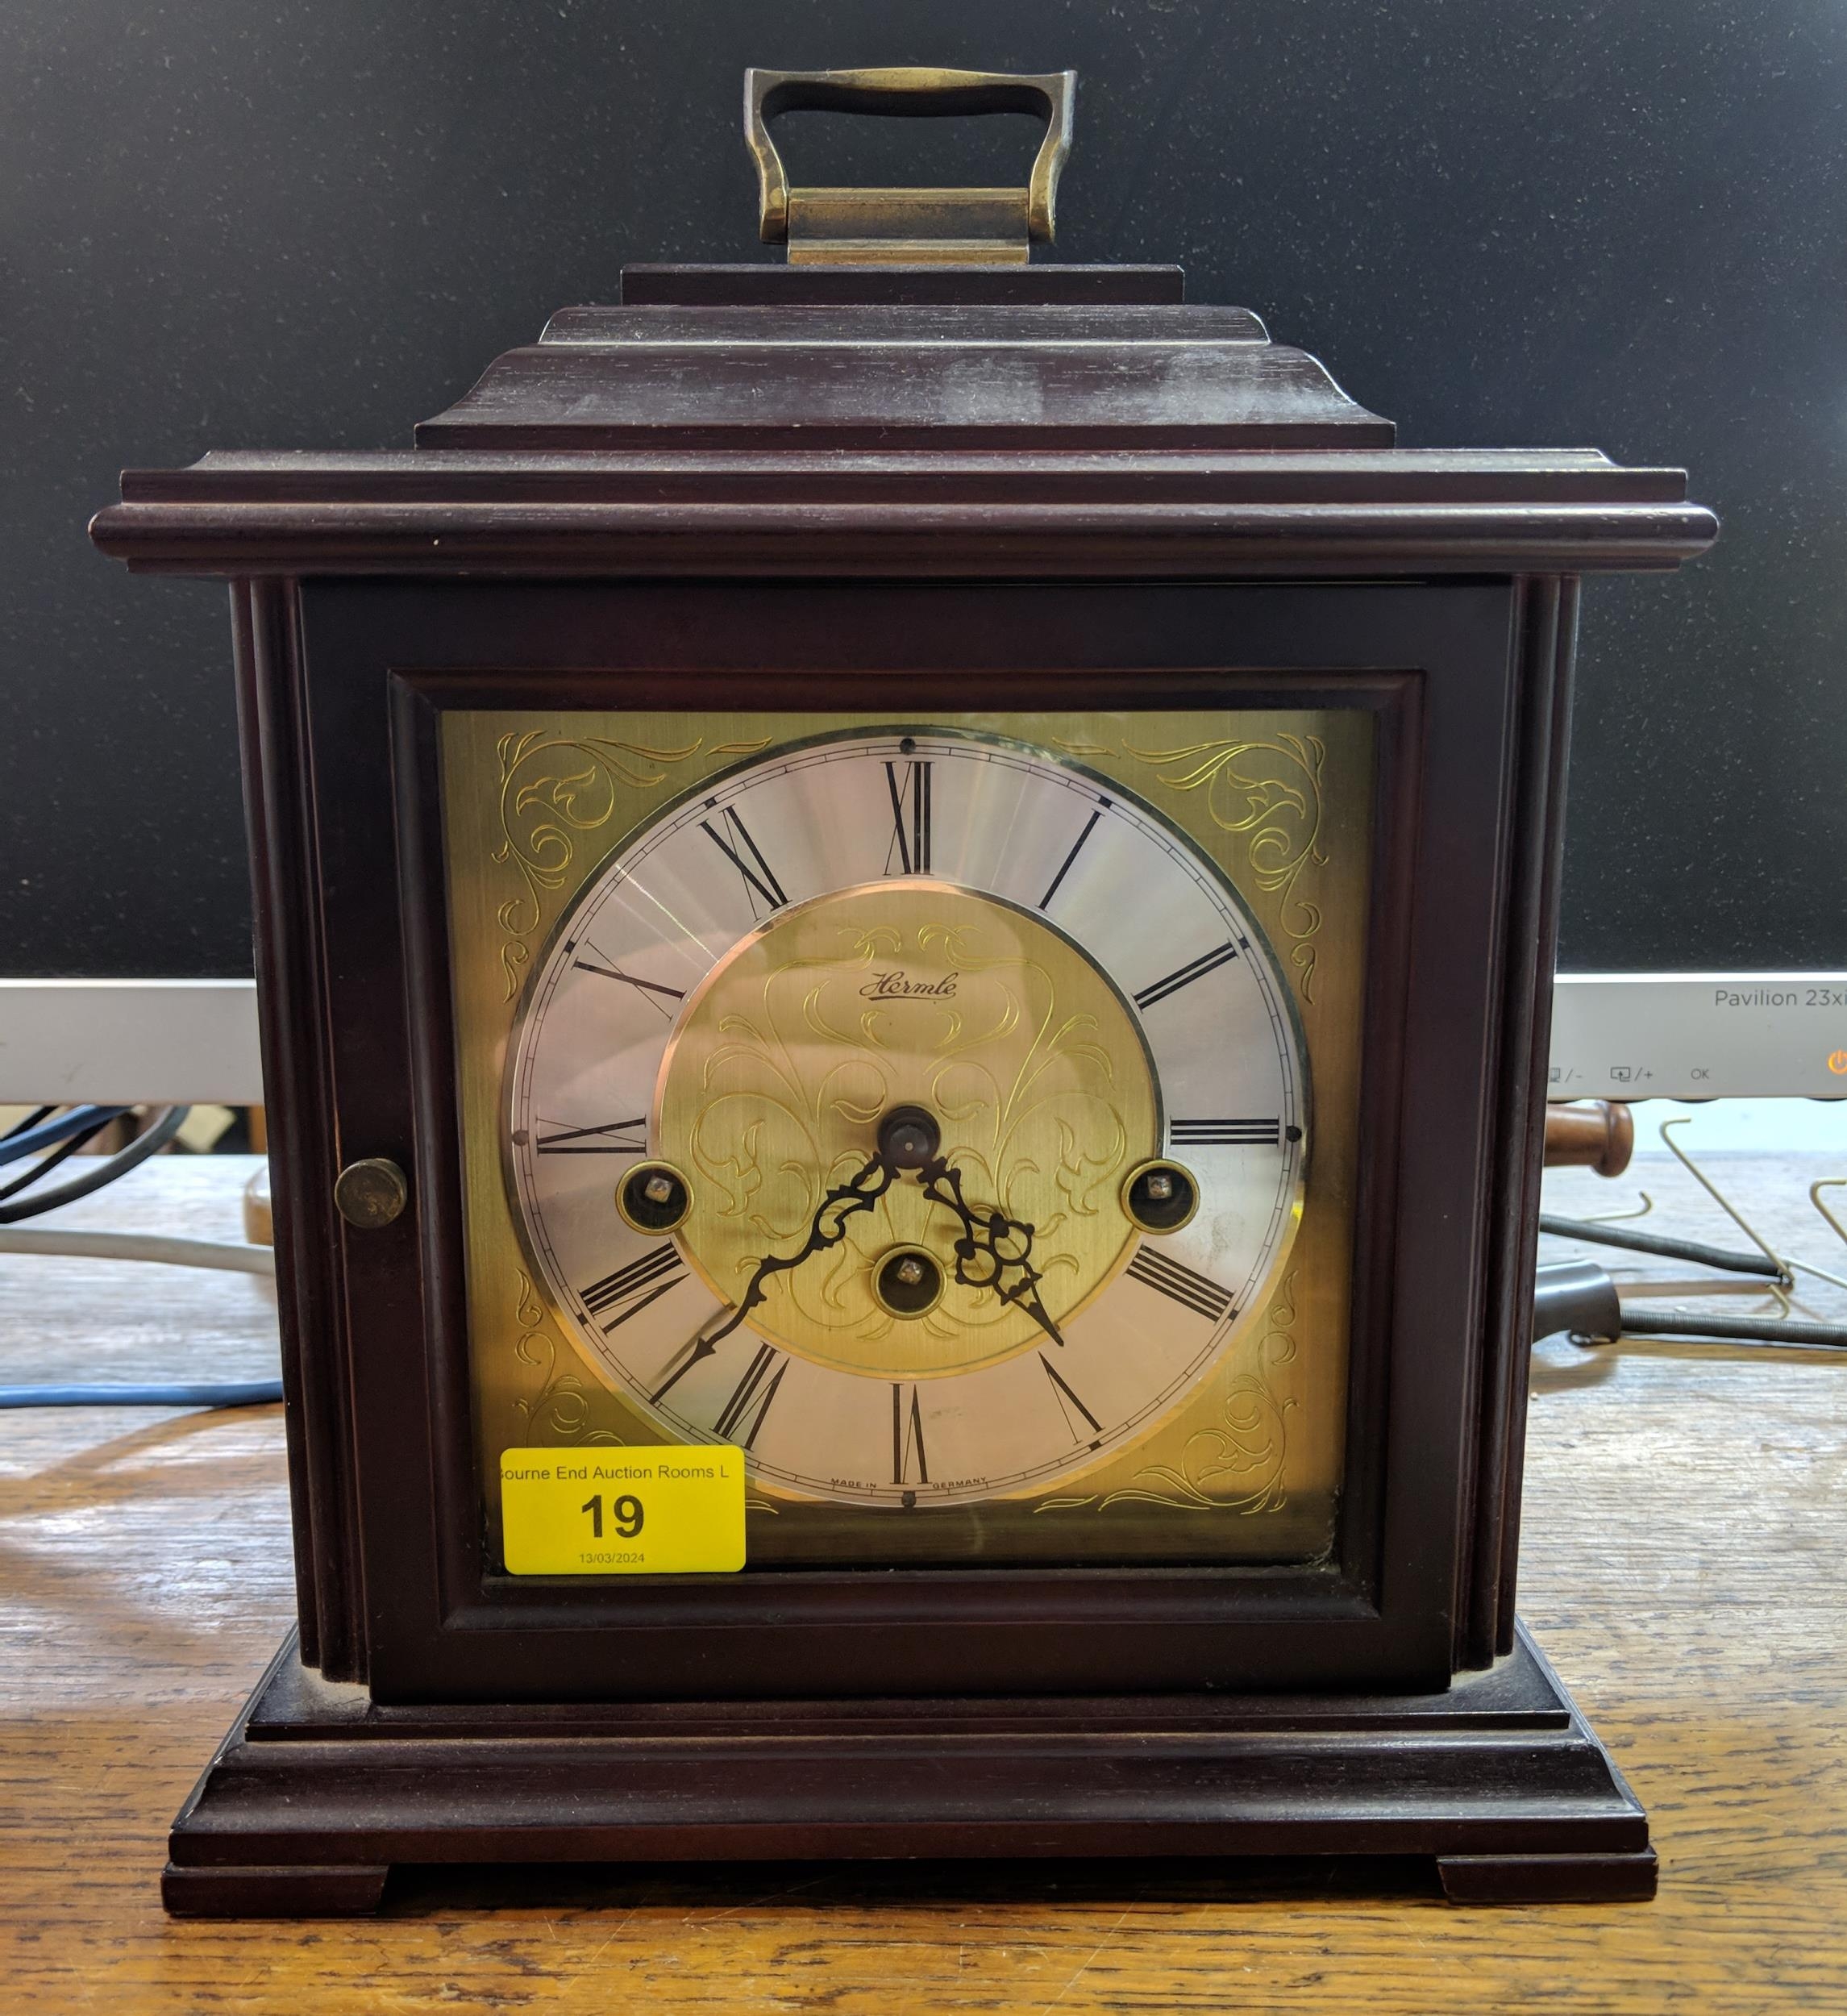 A late 10th century C Hermle German mantle clock in a mahogany finished case, the face with a